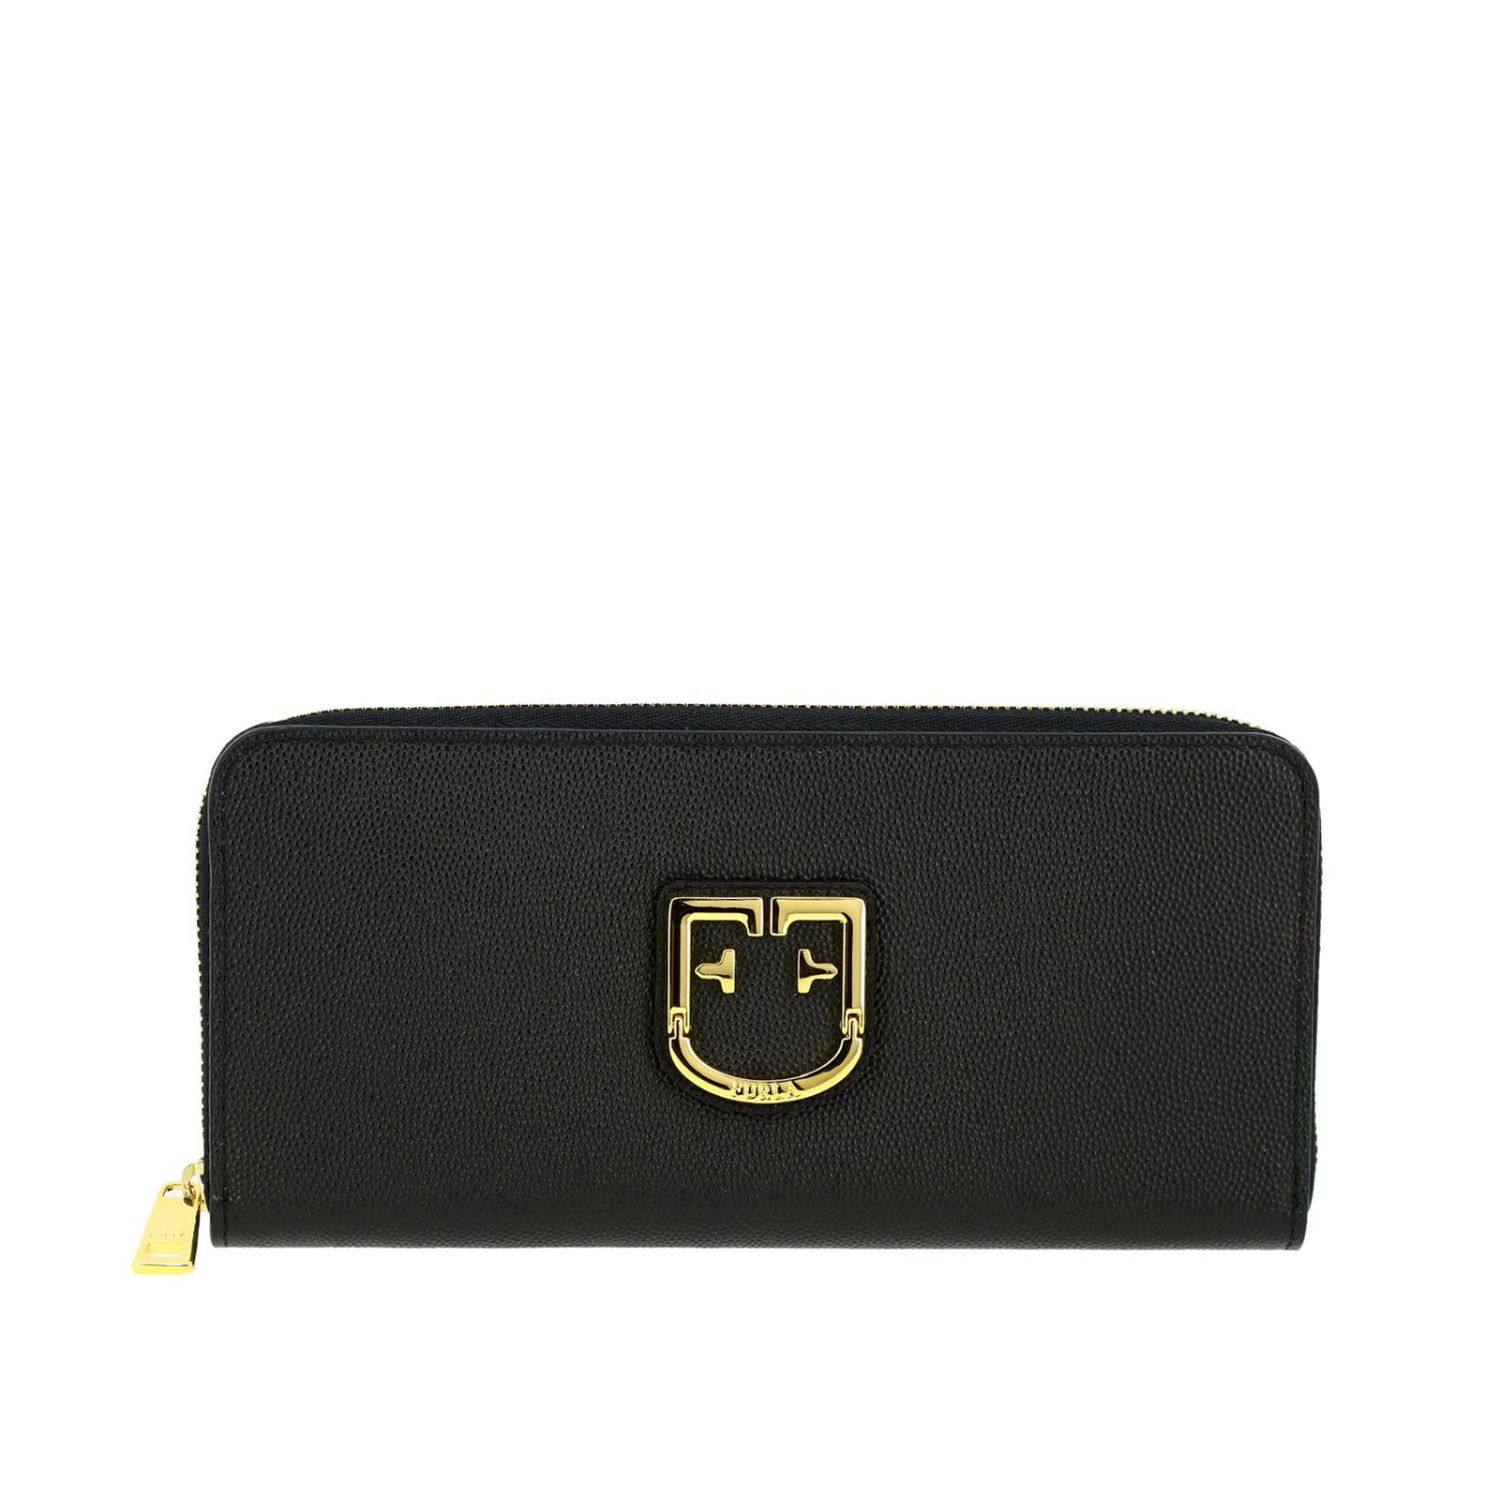 Furla Outlet: Belvedere XL wallet in leather with monogram - Black ...